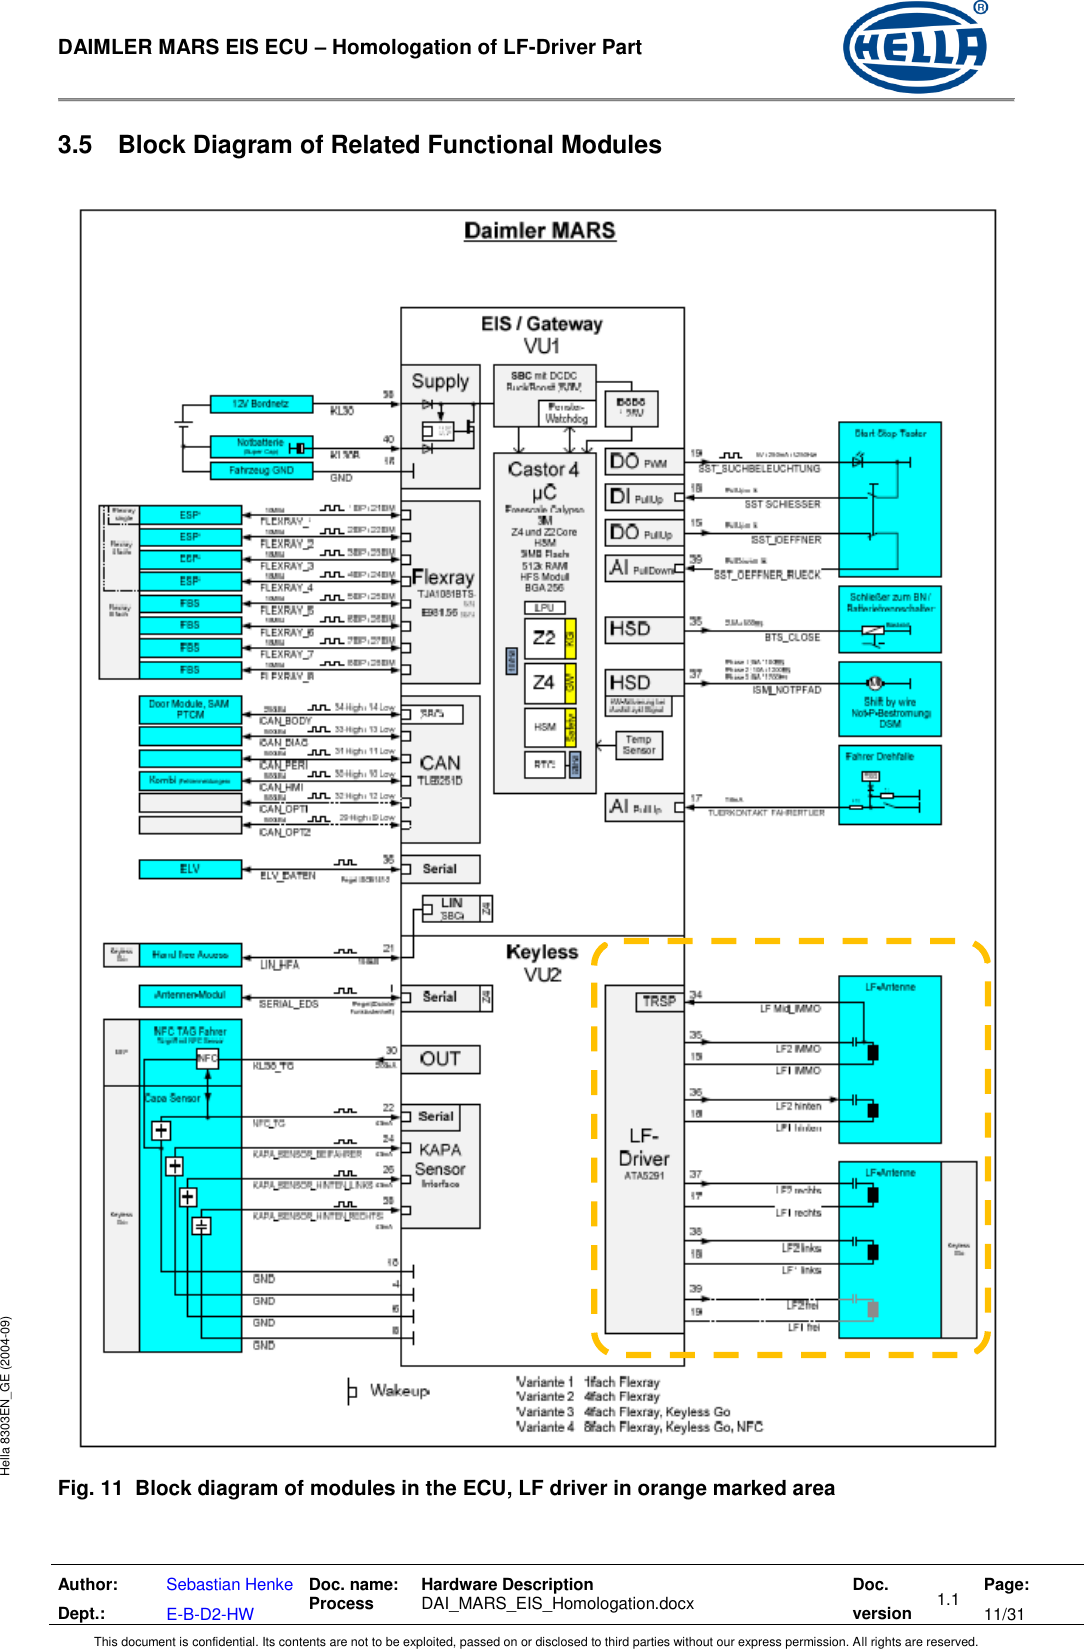  DAIMLER MARS EIS ECU – Homologation of LF-Driver Part   Author: Dept.: Sebastian Henke E-B-D2-HW Doc. name: Process Hardware Description  DAI_MARS_EIS_Homologation.docx Doc. version 1.1 Page: 11/31 This document is confidential. Its contents are not to be exploited, passed on or disclosed to third parties without our express permission. All rights are reserved. Hella 8303EN_GE (2004-09) 3.5  Block Diagram of Related Functional Modules   Fig. 11  Block diagram of modules in the ECU, LF driver in orange marked area  